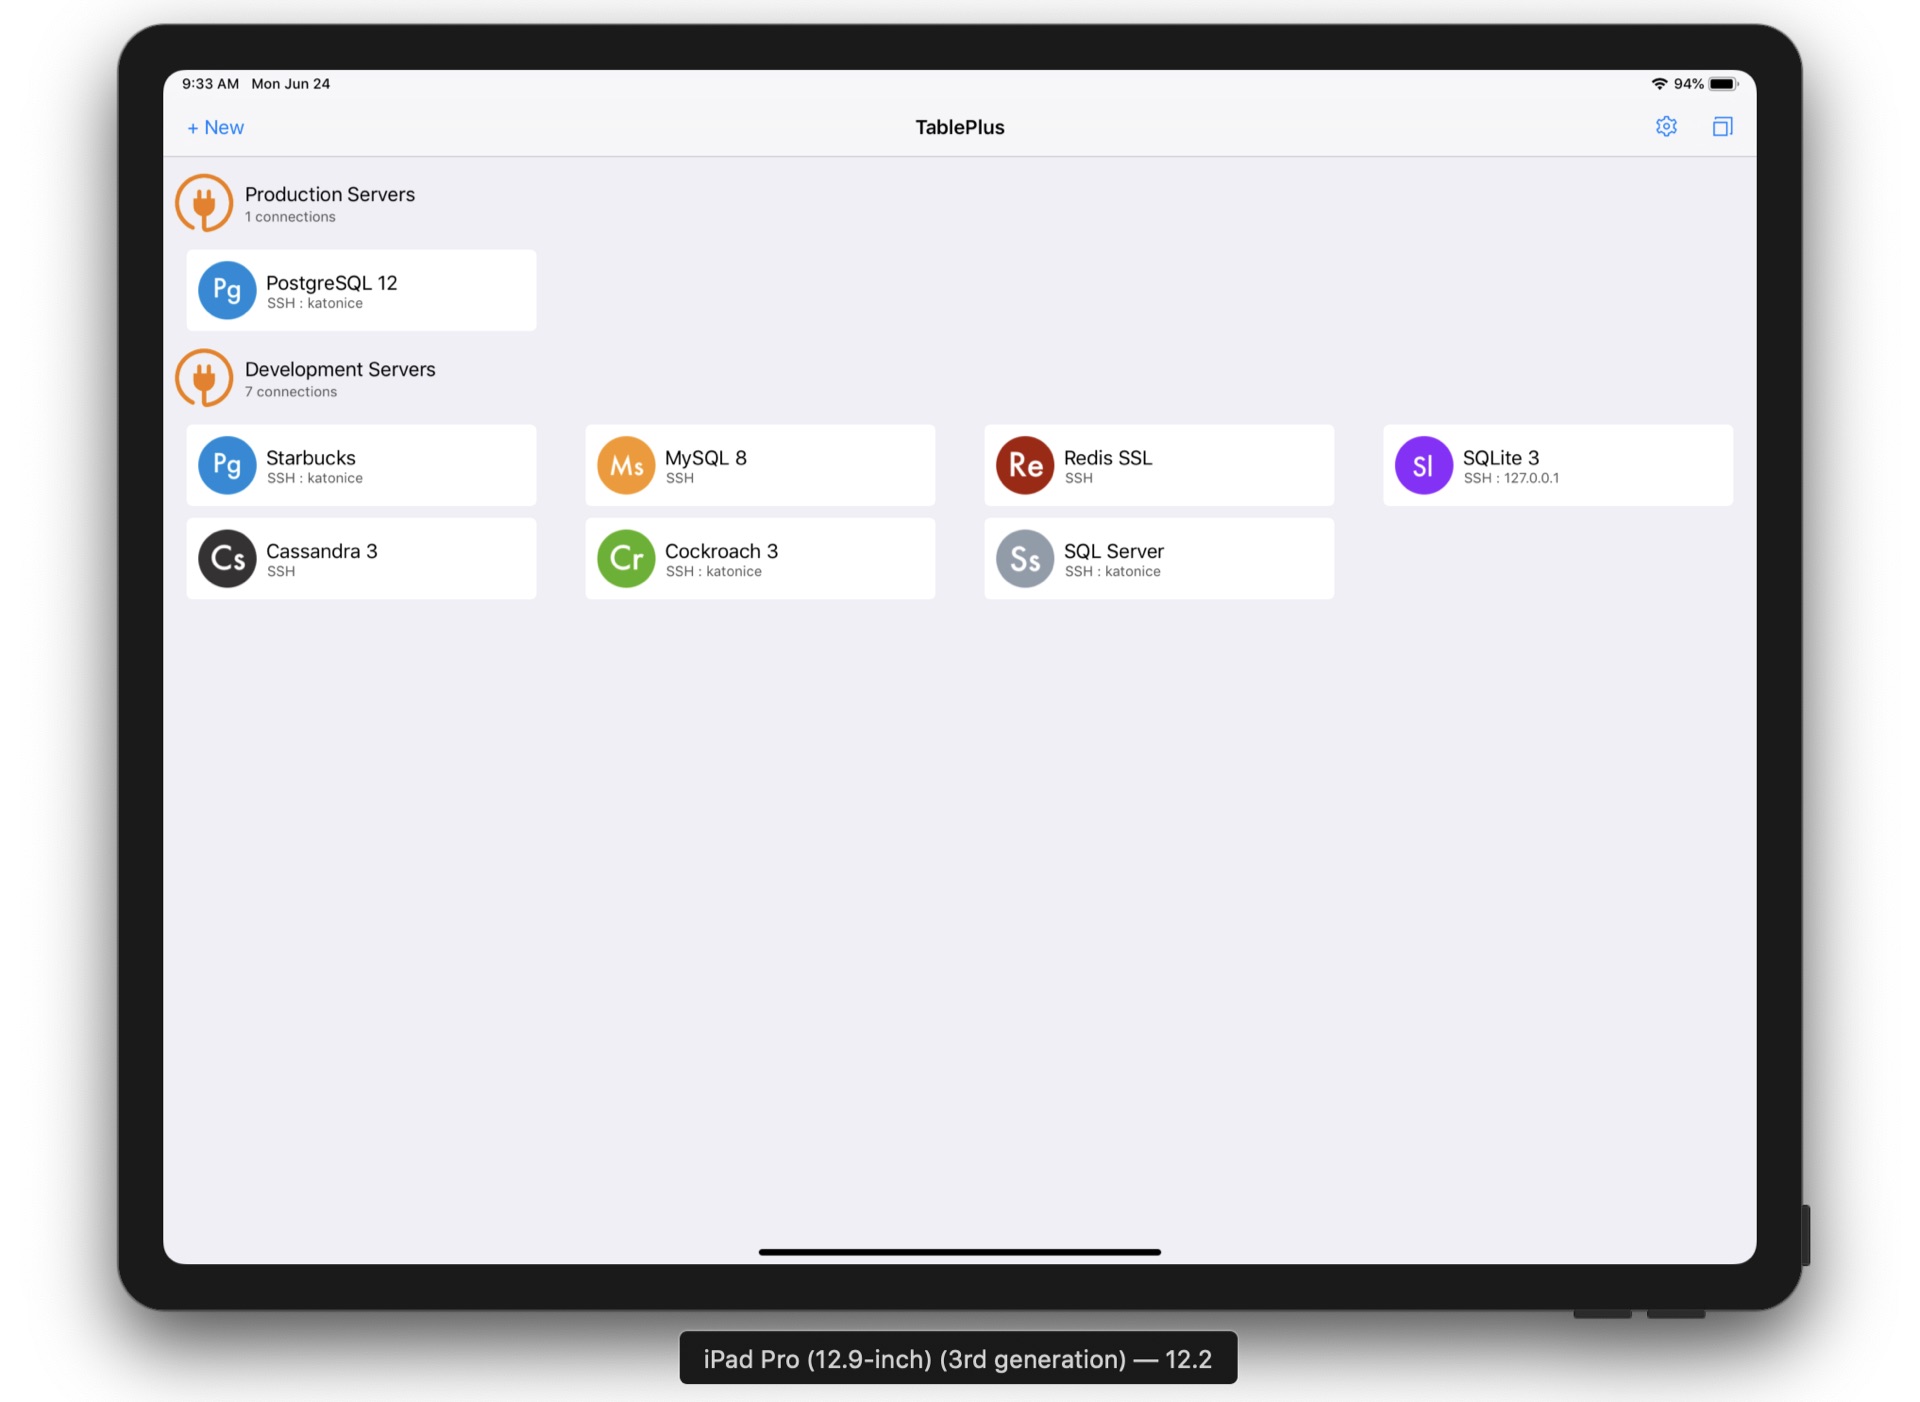   TablePlus for iOS workspace